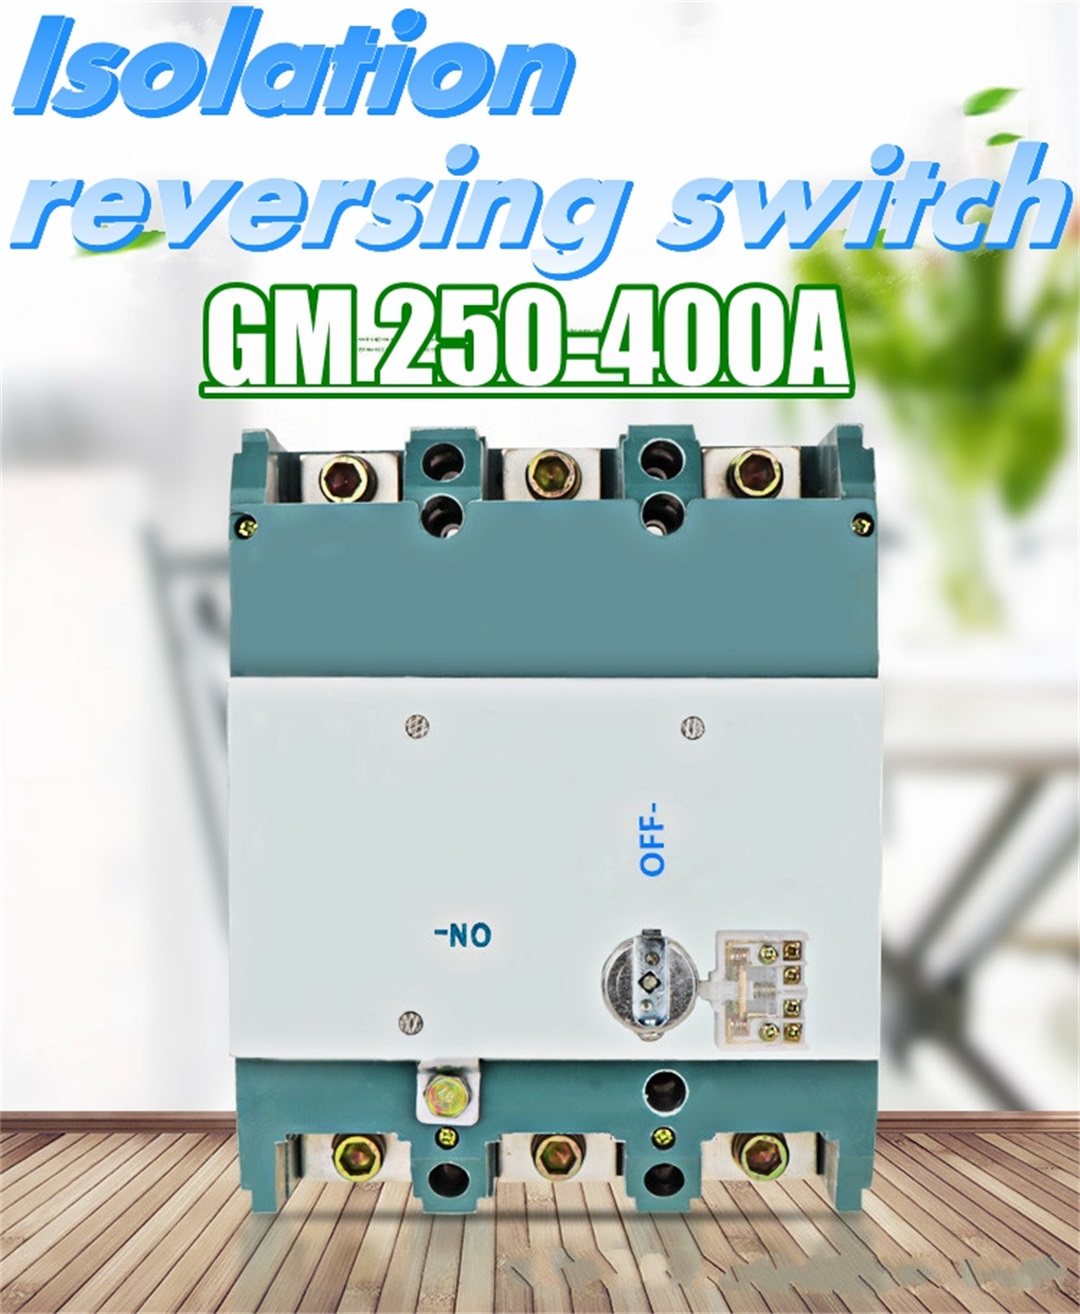 Isolate the reverse switch